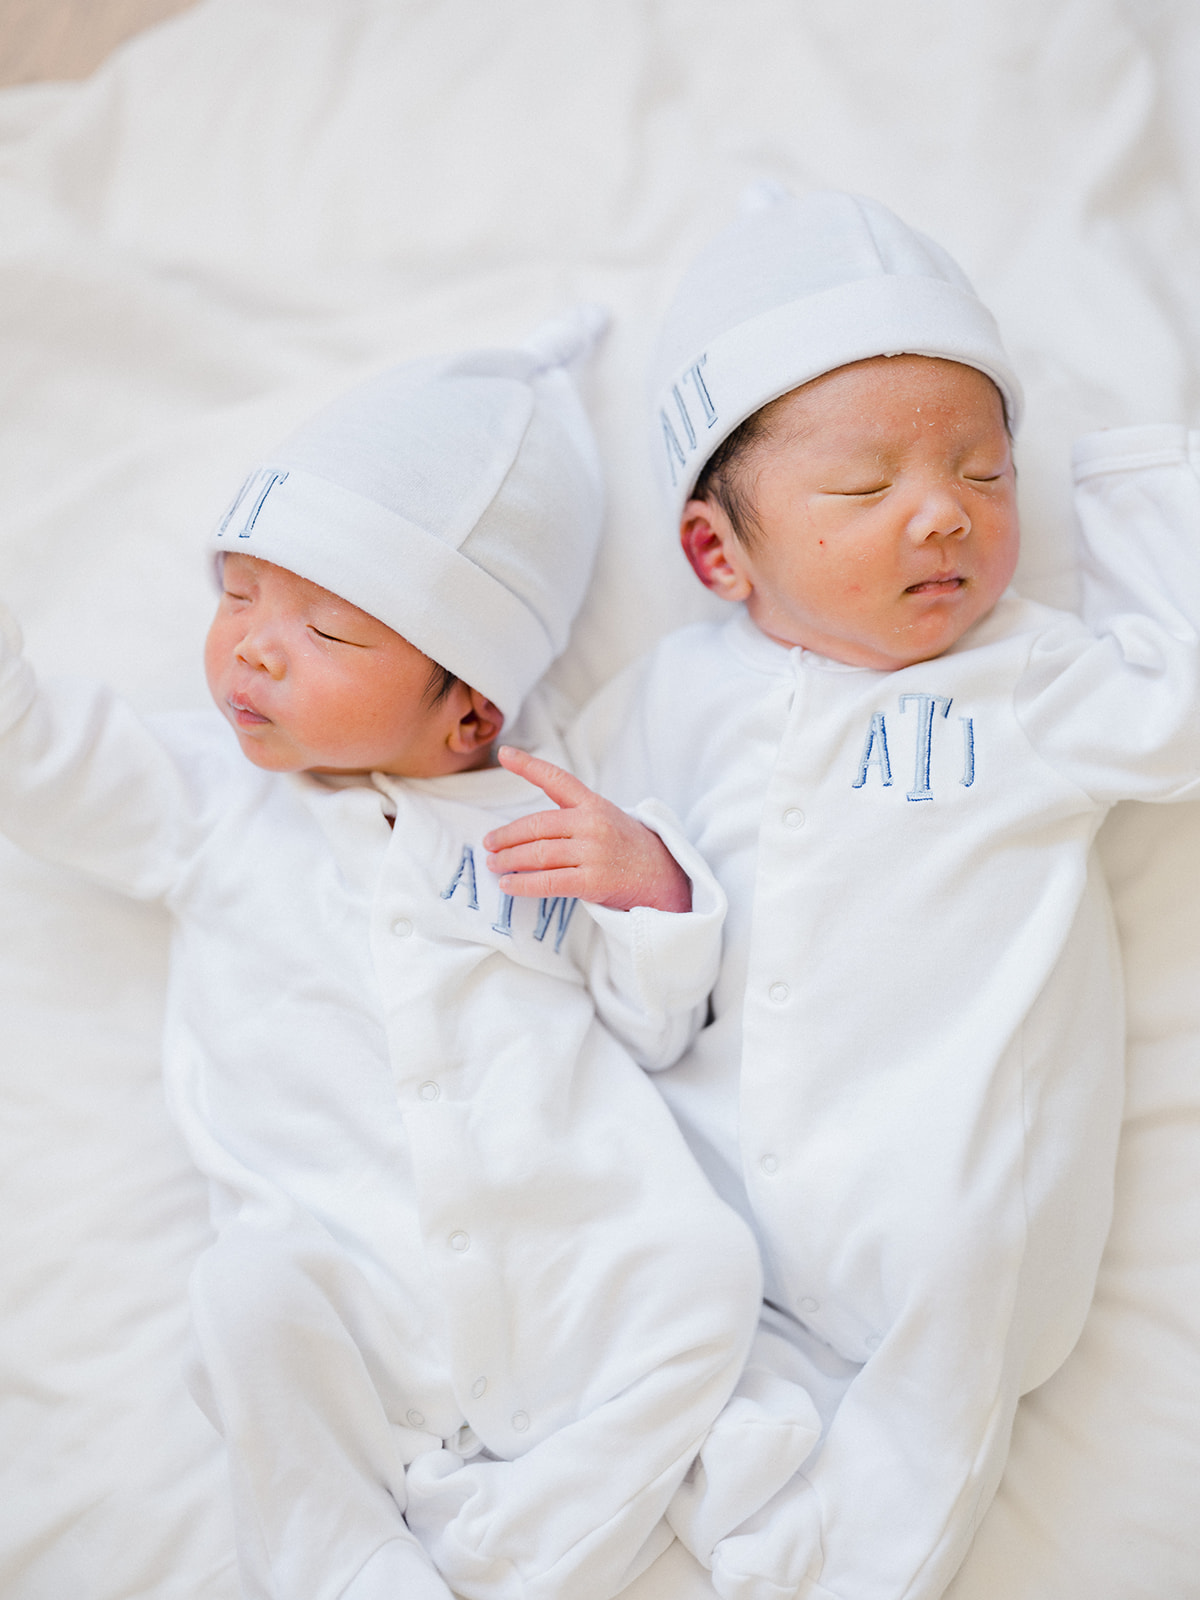 Bundled in their cute white outfits, the boys were sleepy and peaceful throughout the photoshoot. #newborn #photography